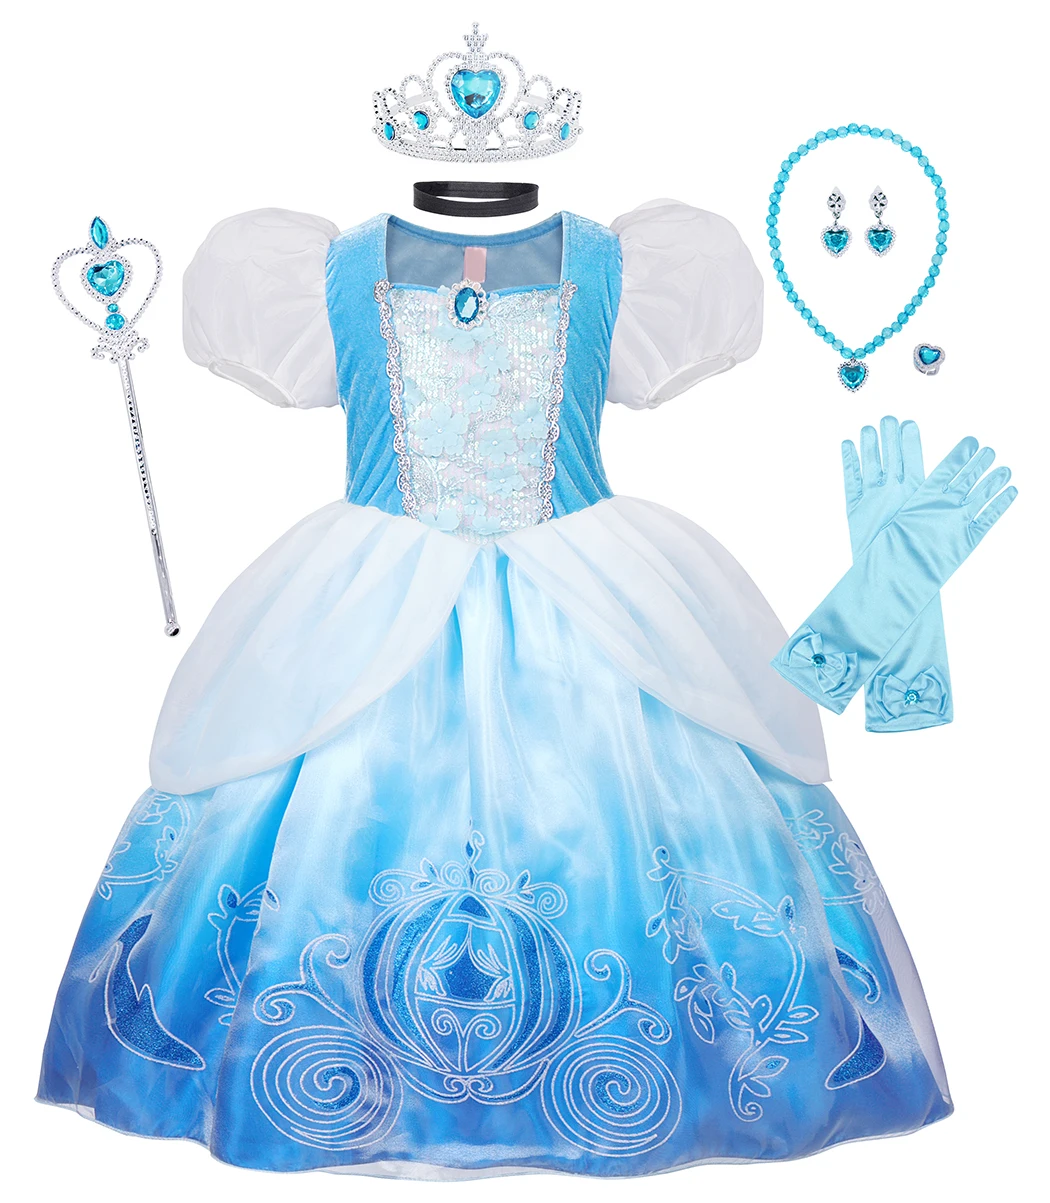 Toddle Girls Kids Cinderella Princess Cosplay Party Costume Fancy Dress Outfits